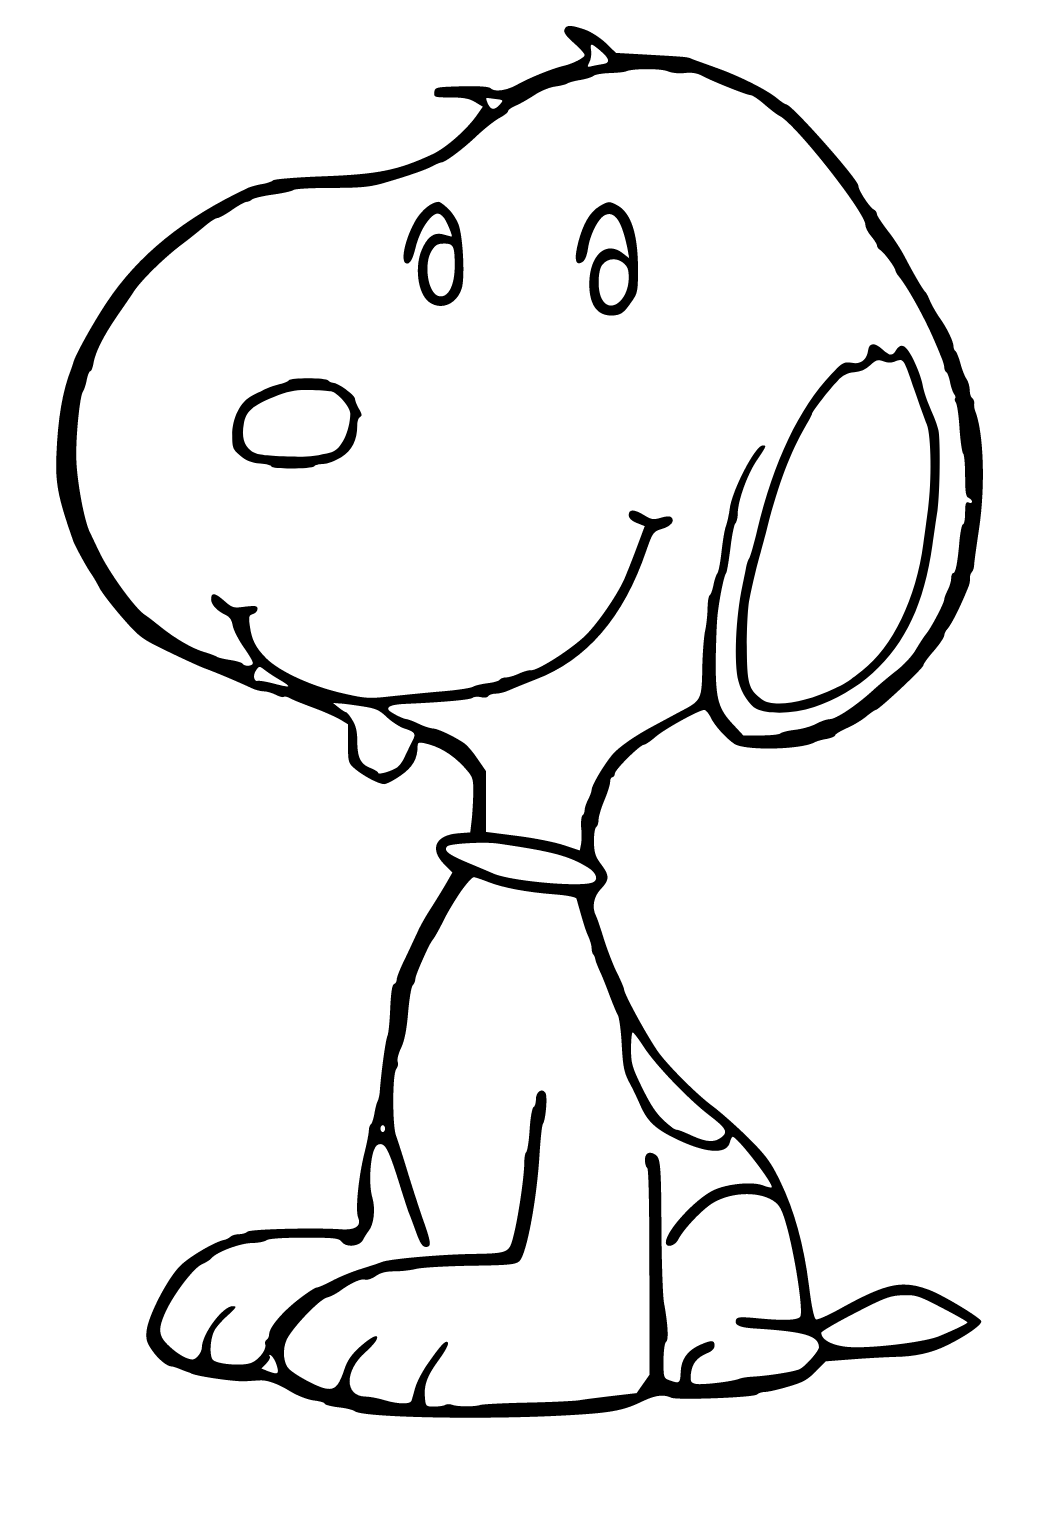 Free printable snoopy easy coloring page sheet and picture for adults and kids girls and boys